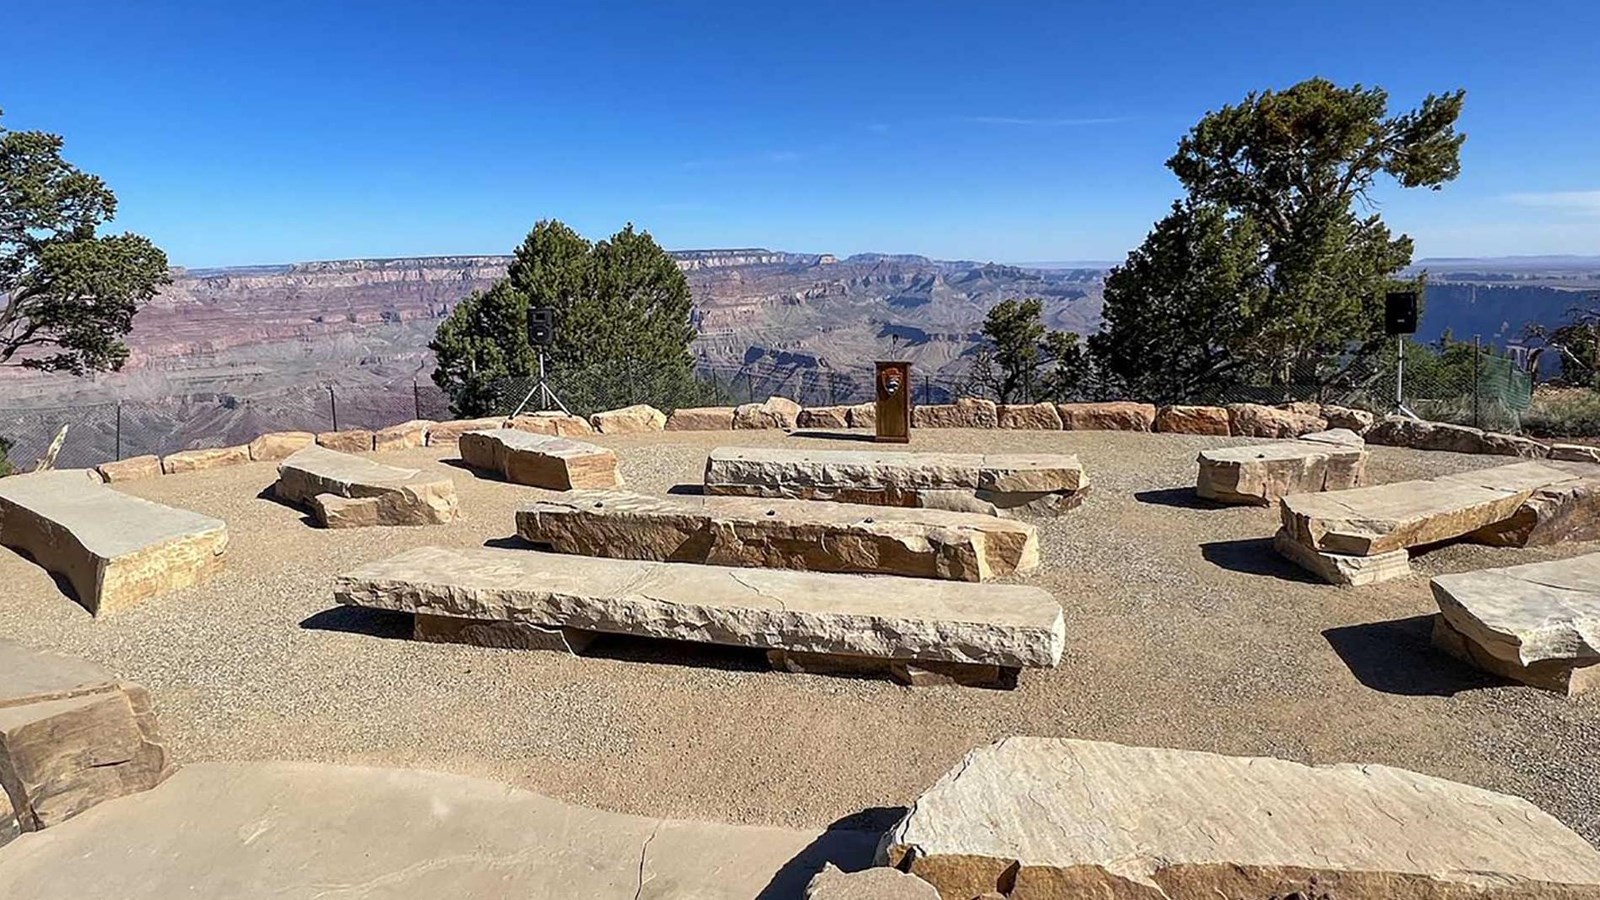 three rows of stone benches overlooking a vast canyon landscape